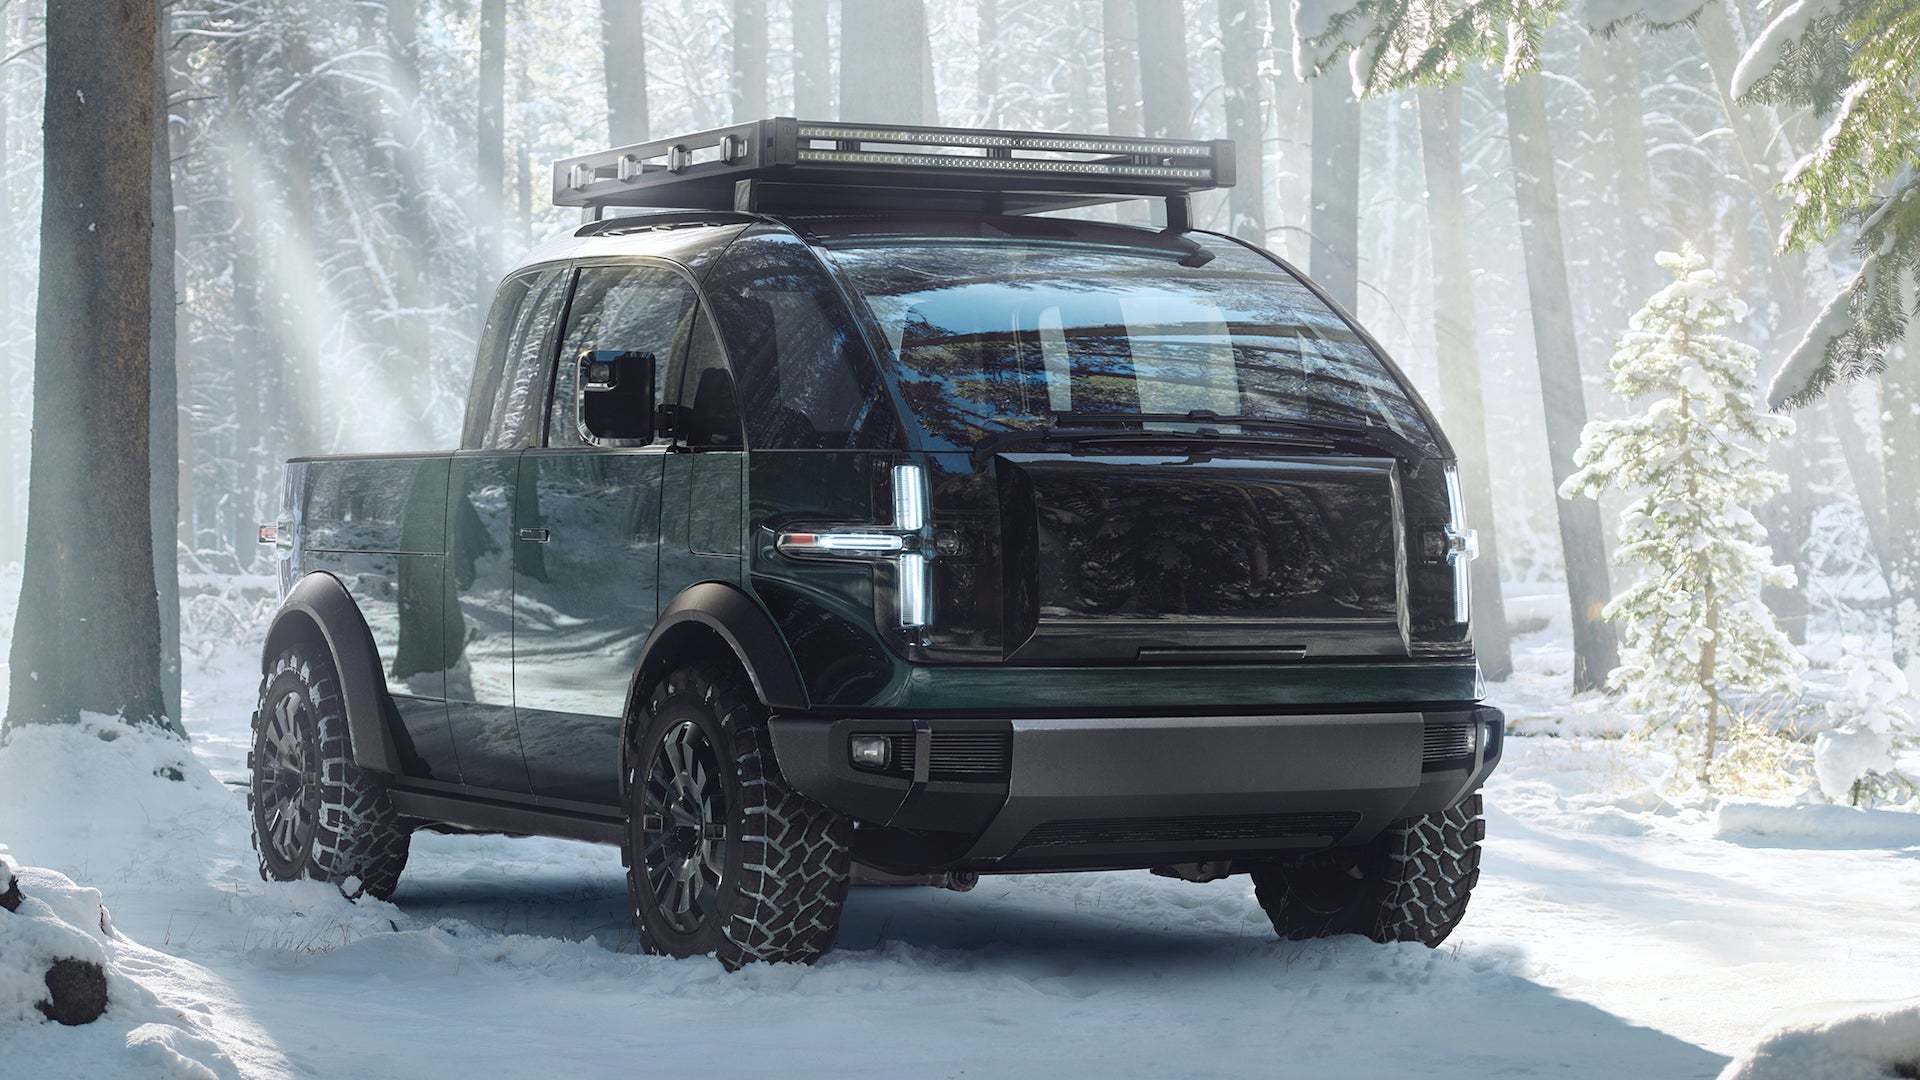 The 600HP Canoo Electric Truck Is a OneSizeFitsAll Rig for Adventurers